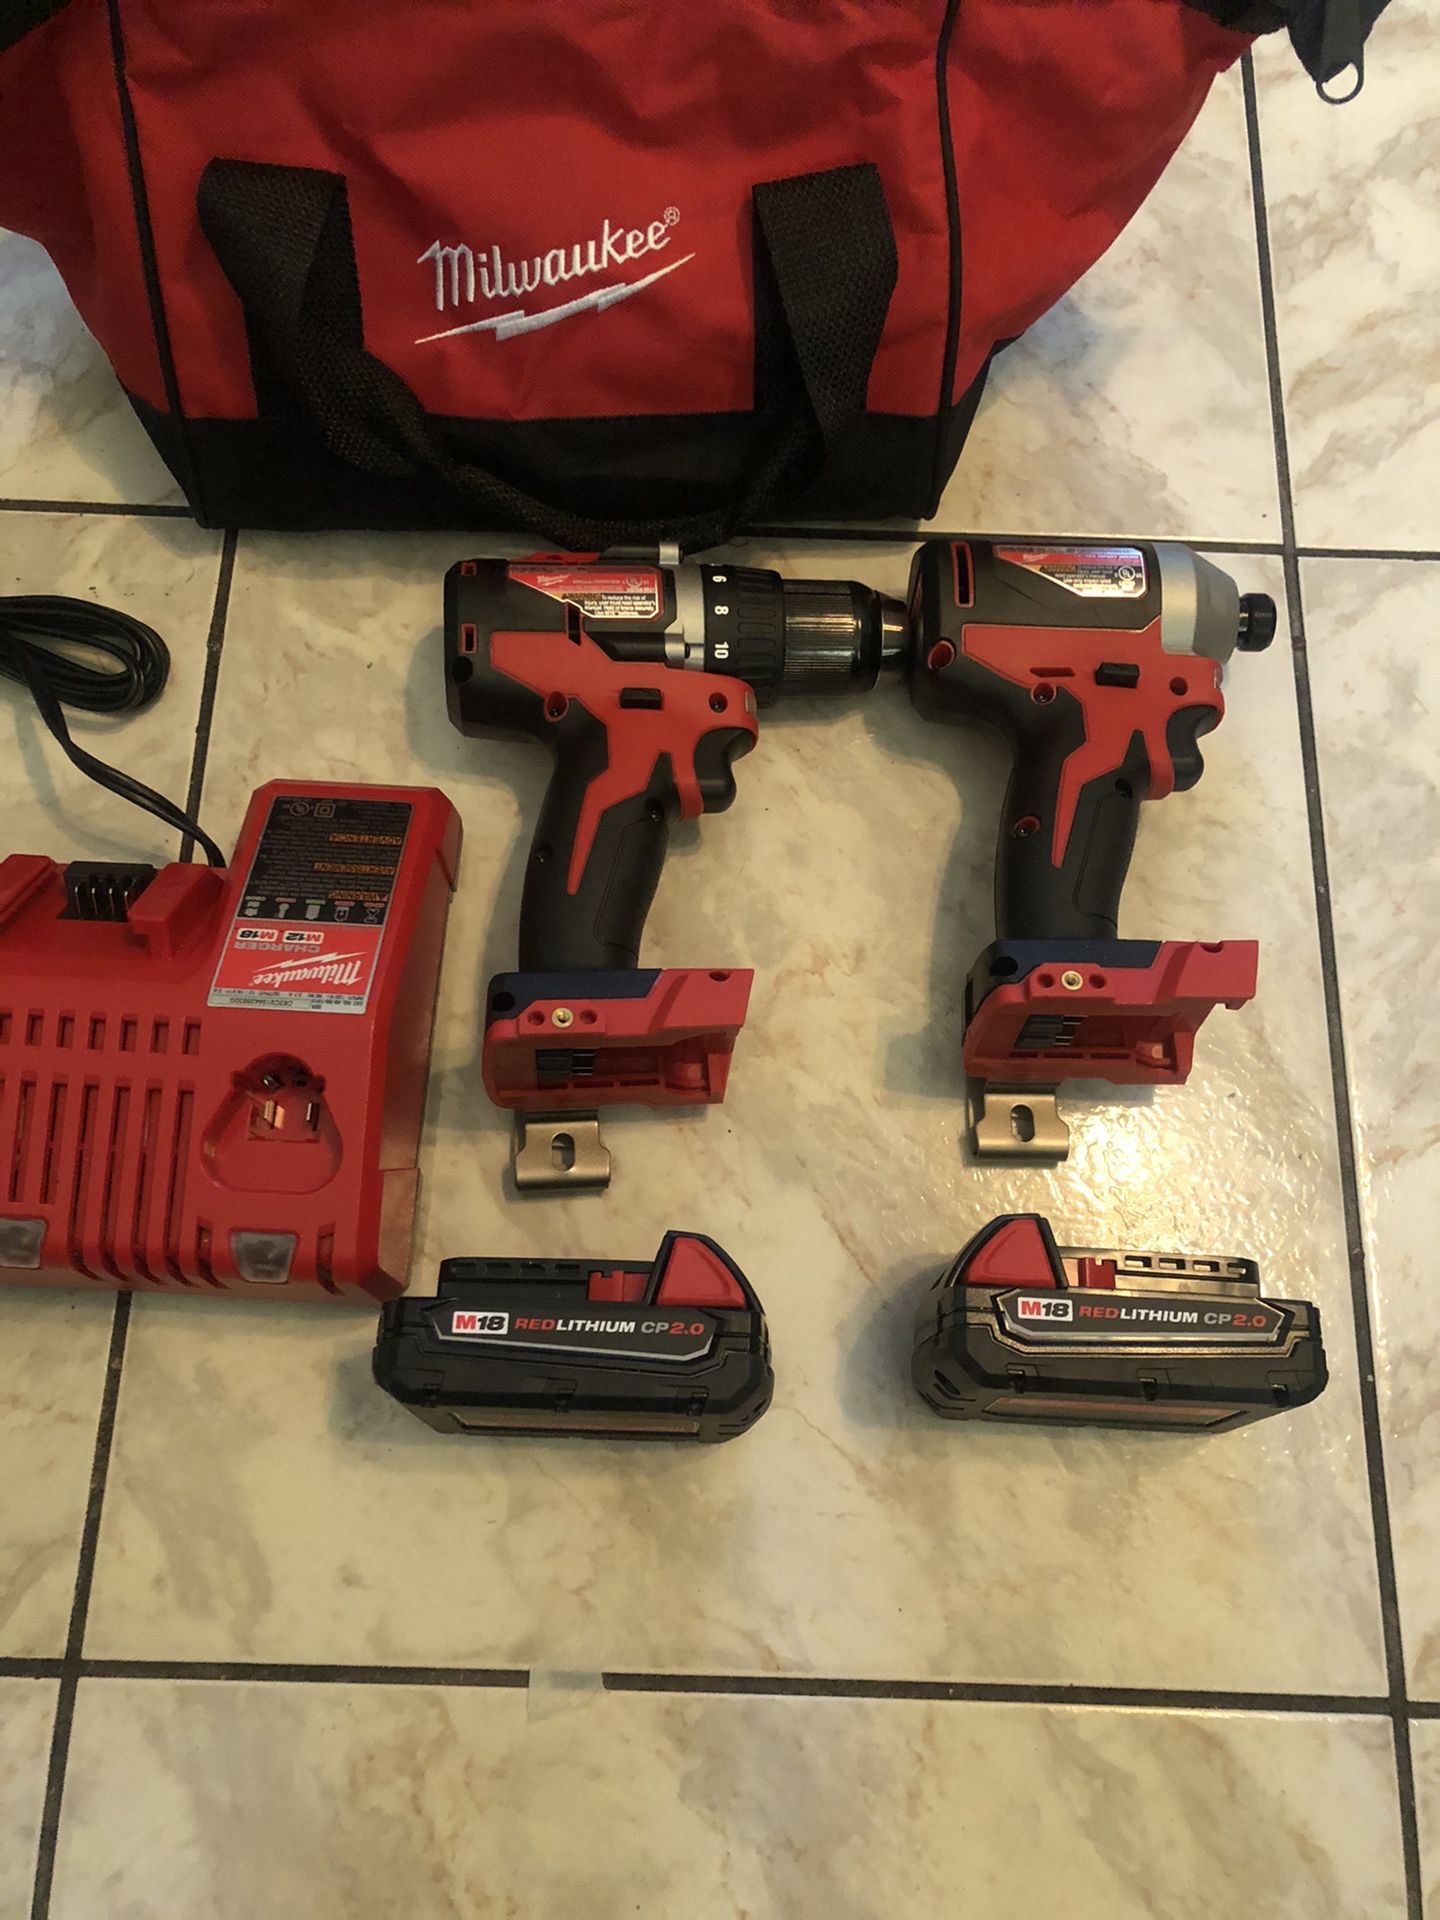 New Milwaukee 18-Volt Lithium-Ion Brushless Cordless Compact Drill/Impact Combo Kit (2-Tool) W/ (2) 2.0Ah Batteries, Charger & Bag $190